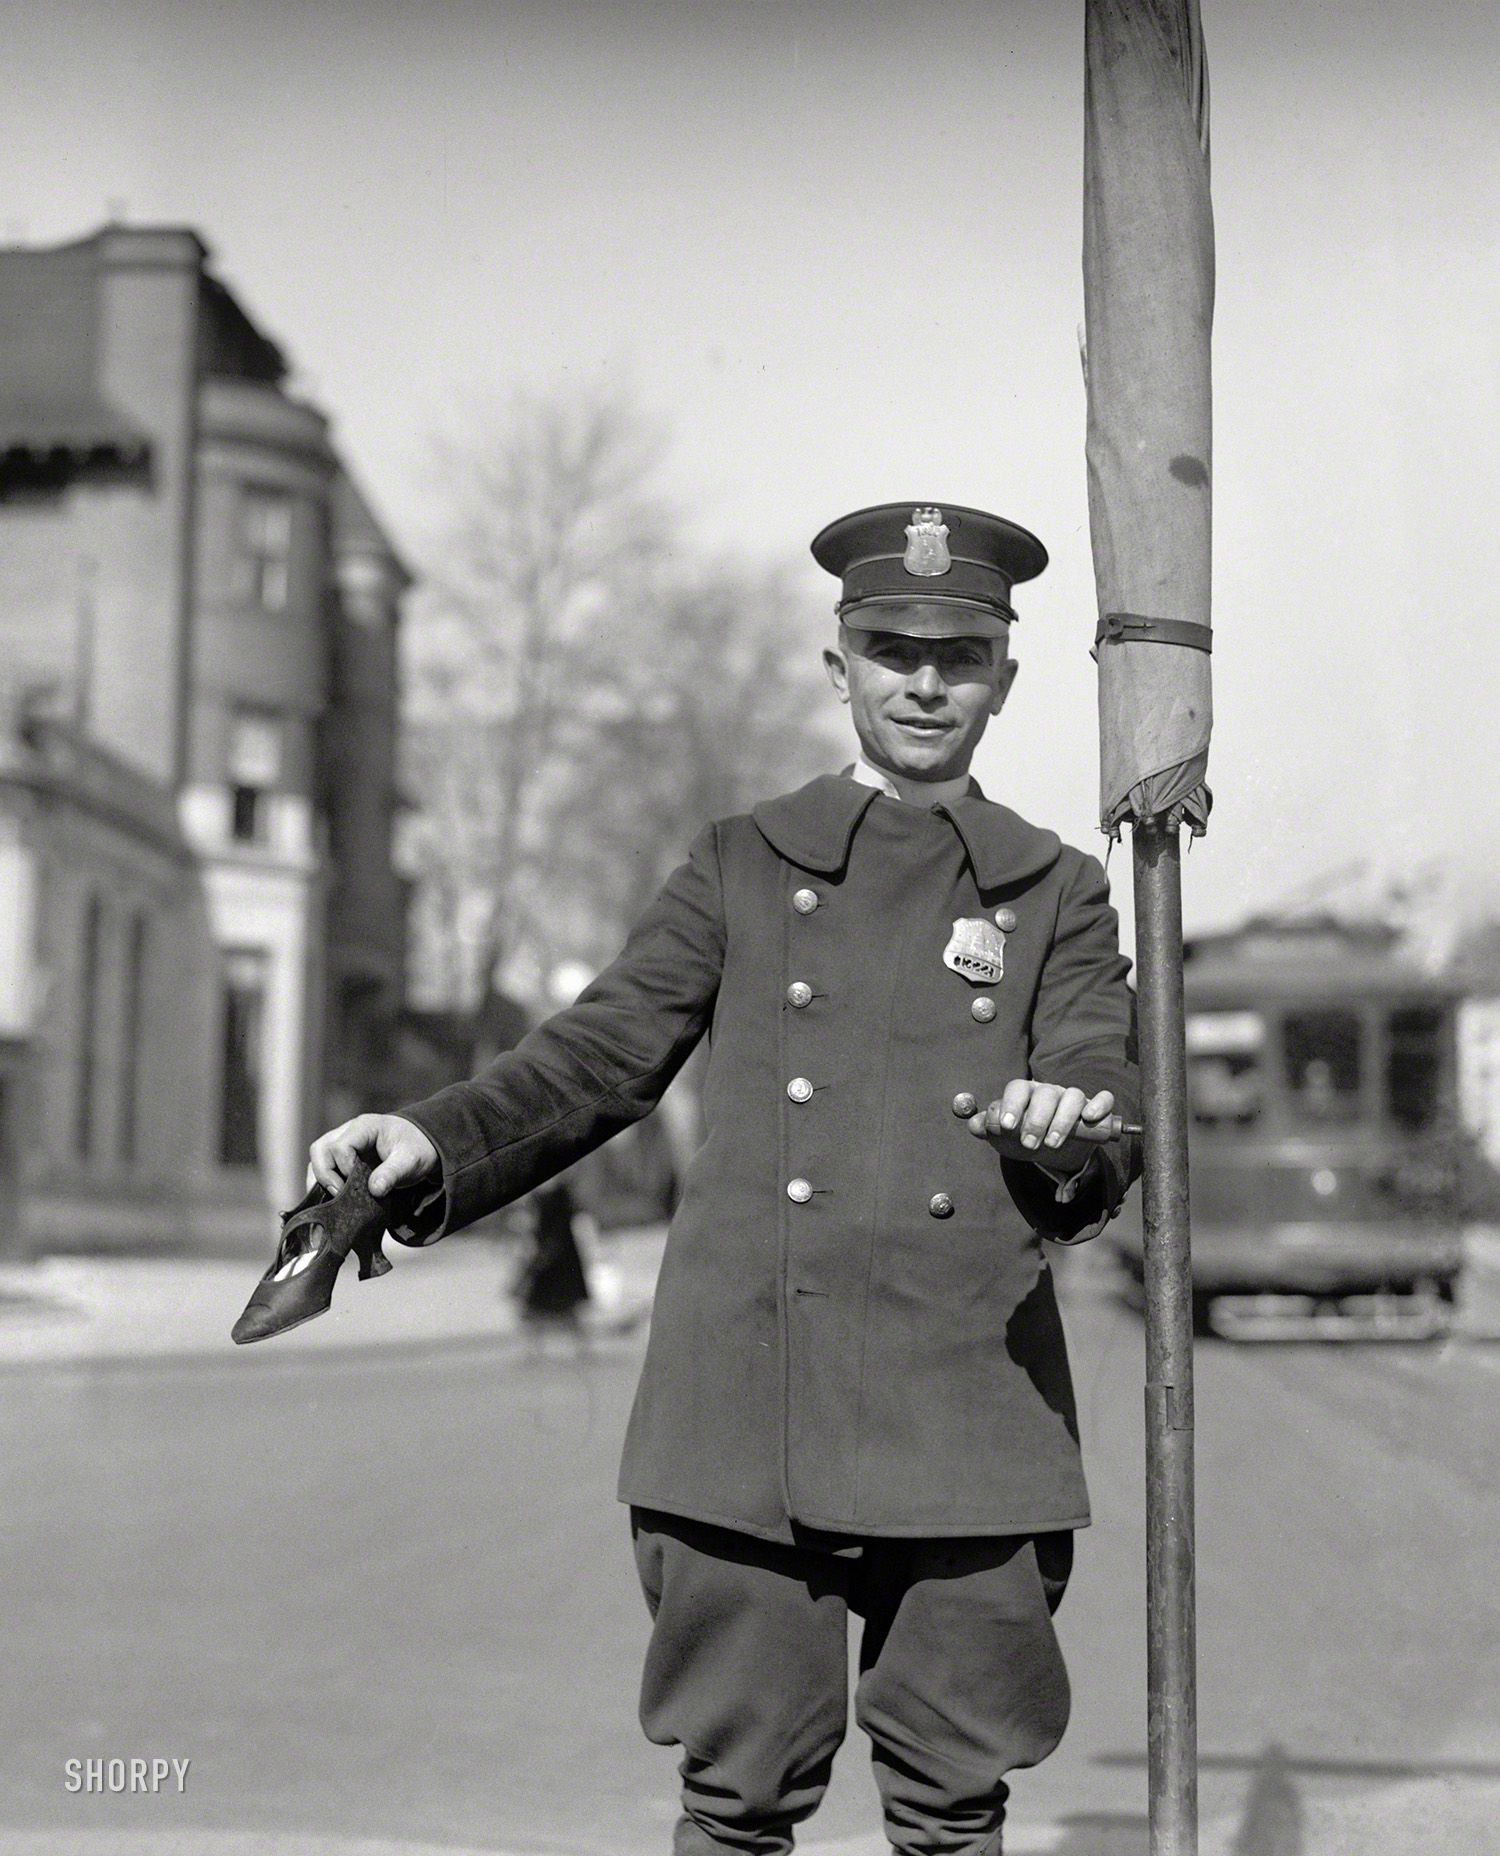 Washington, D.C. "S.S. Banks, March 20, 1923." We suspect this has something to do with traffic safety. National Photo Company glass negative. View full size.